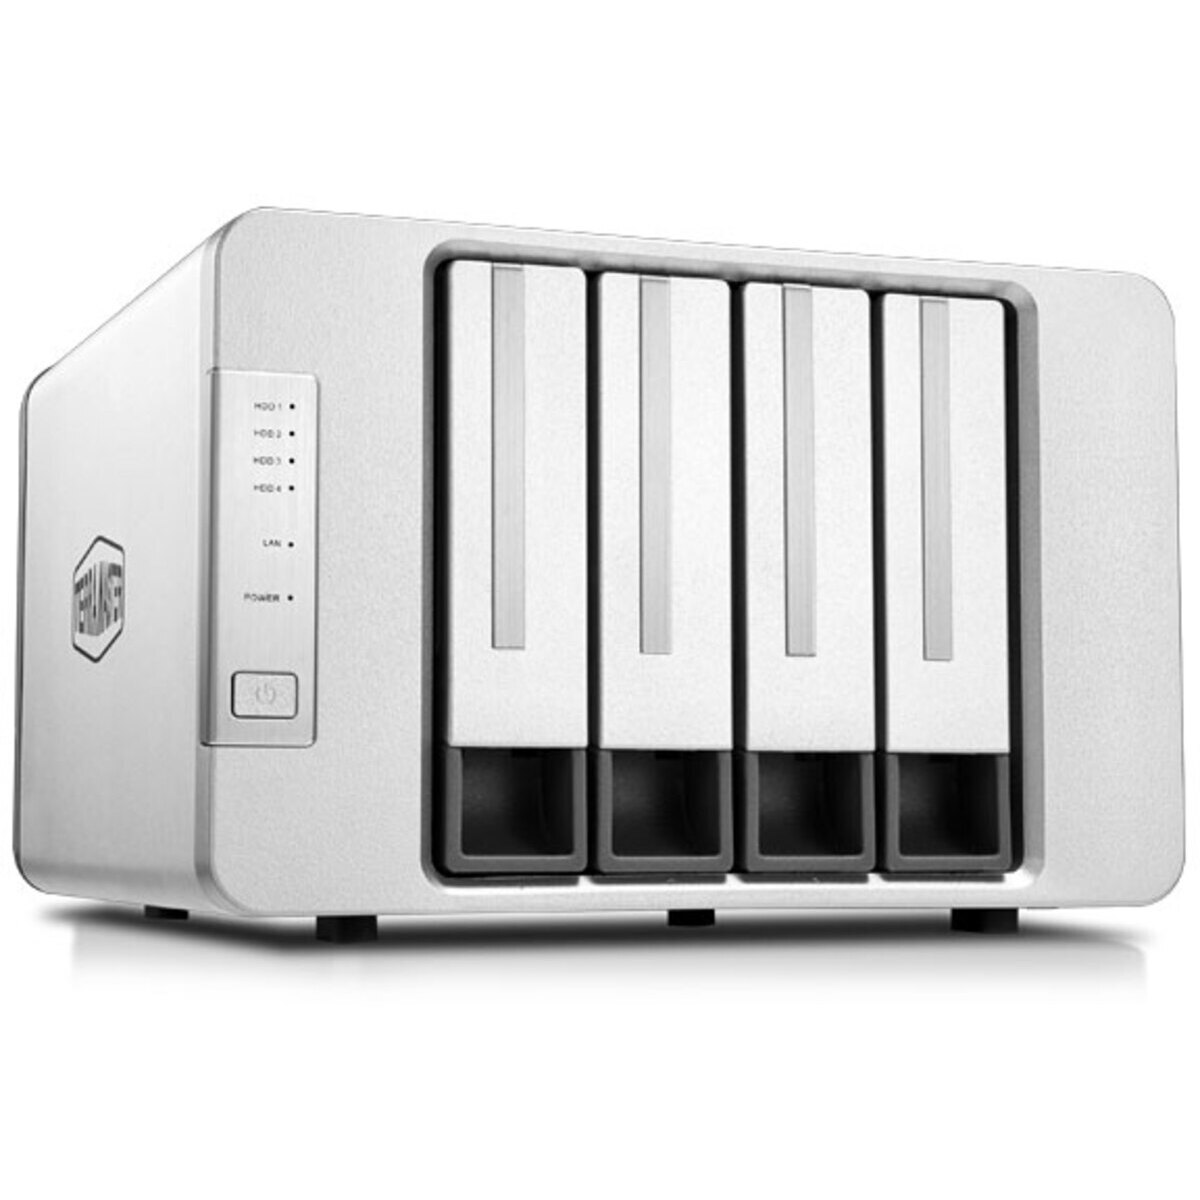 TerraMaster F4-223 18tb 4-Bay Desktop Personal / Basic Home / Small Office NAS - Network Attached Storage Device 3x6tb Seagate IronWolf ST6000VN006 3.5 5400rpm SATA 6Gb/s HDD NAS Class Drives Installed - Burn-In Tested - FREE RAM UPGRADE F4-223